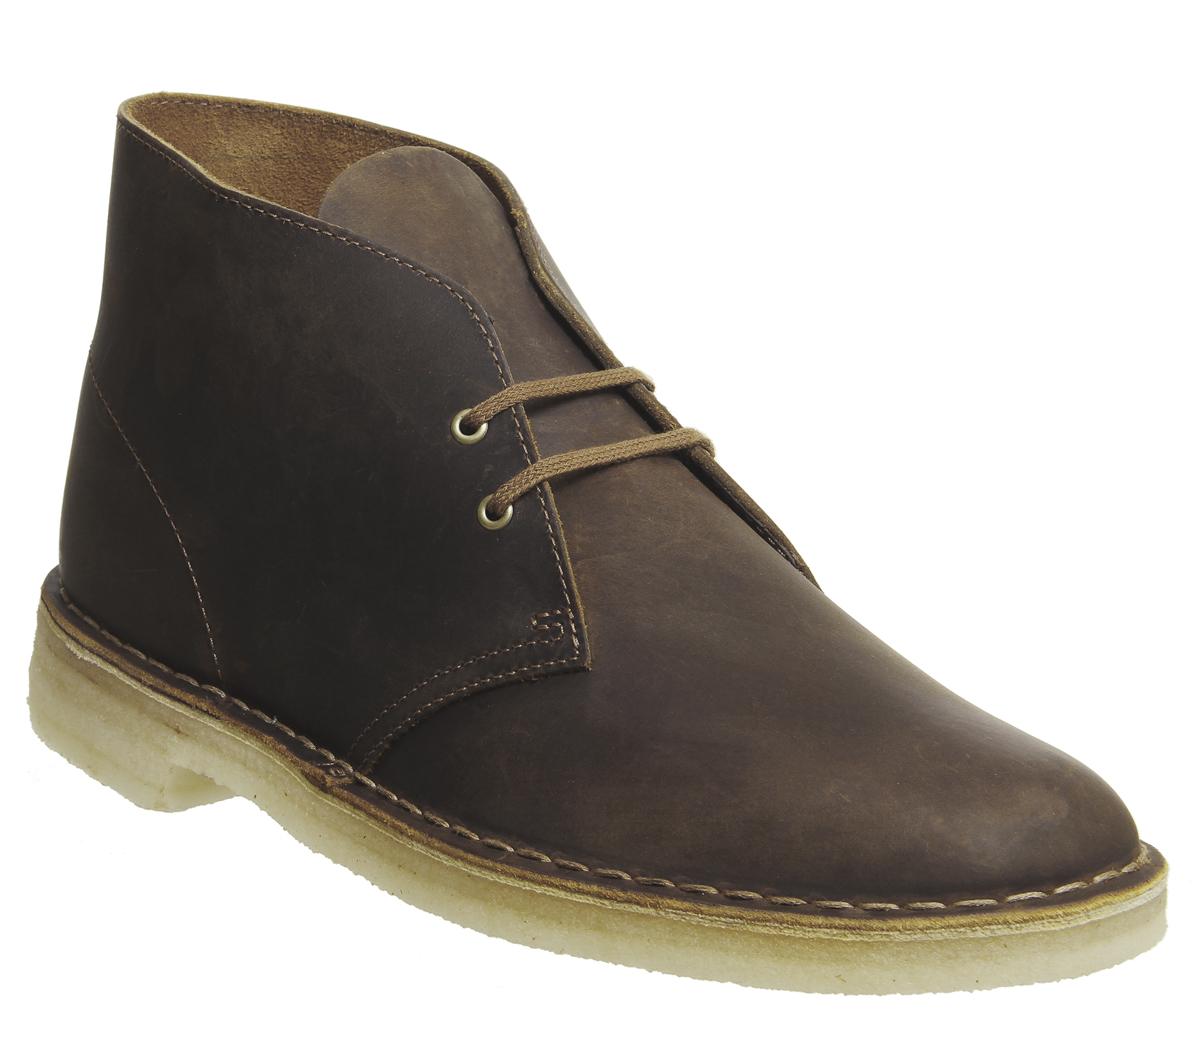 clarks beeswax boot care